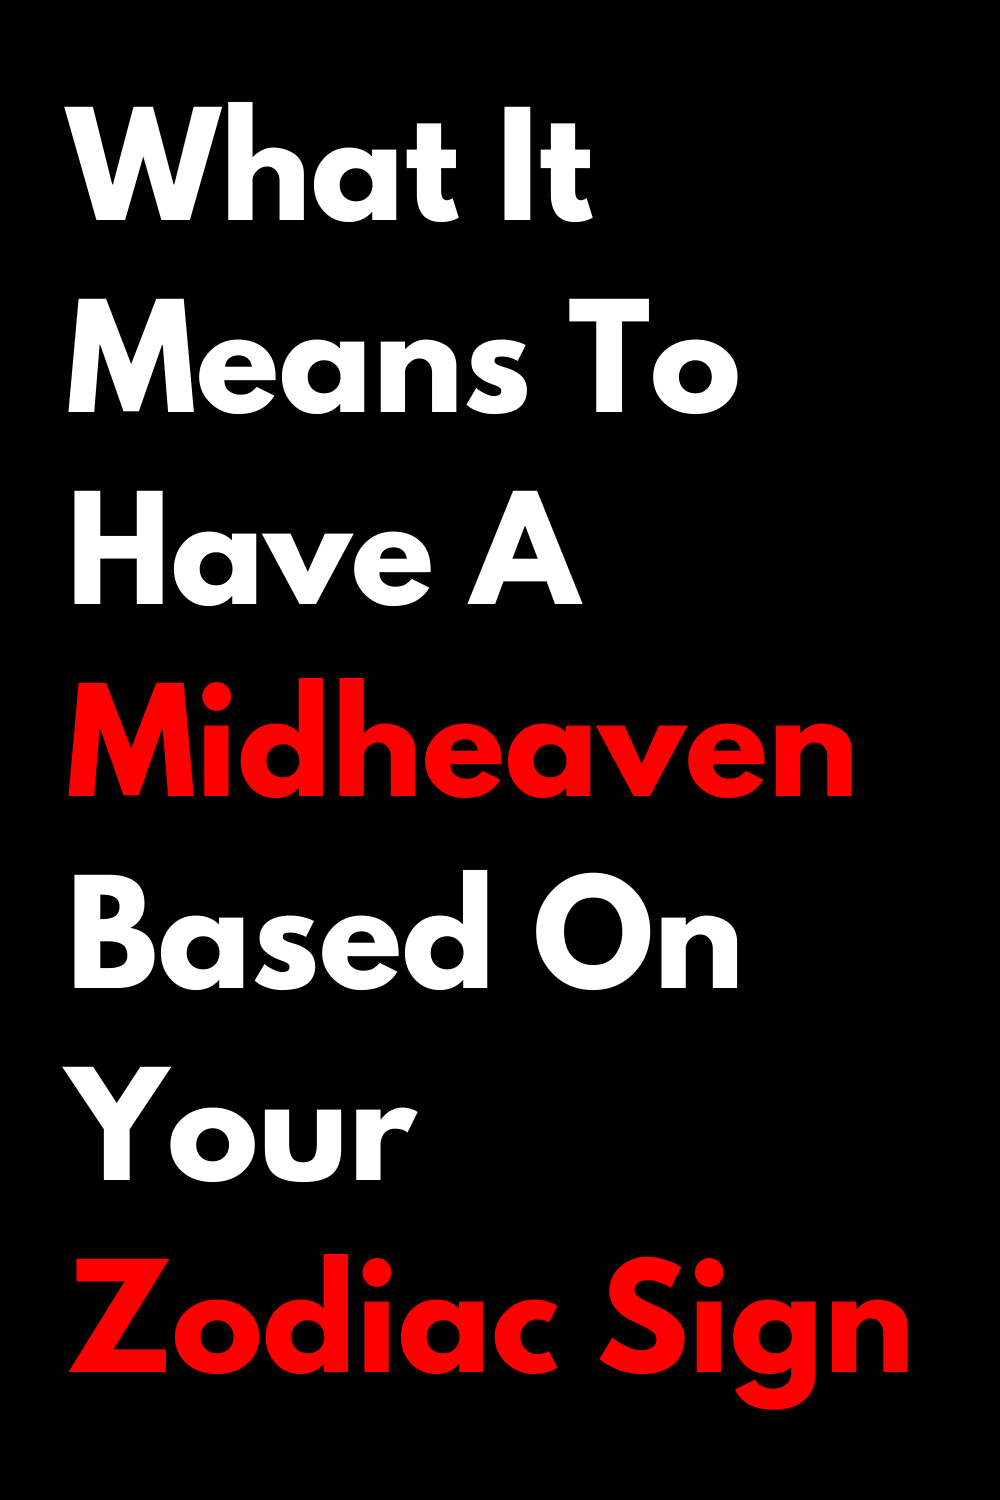 What It Means To Have A Midheaven Based On Your Zodiac Sign